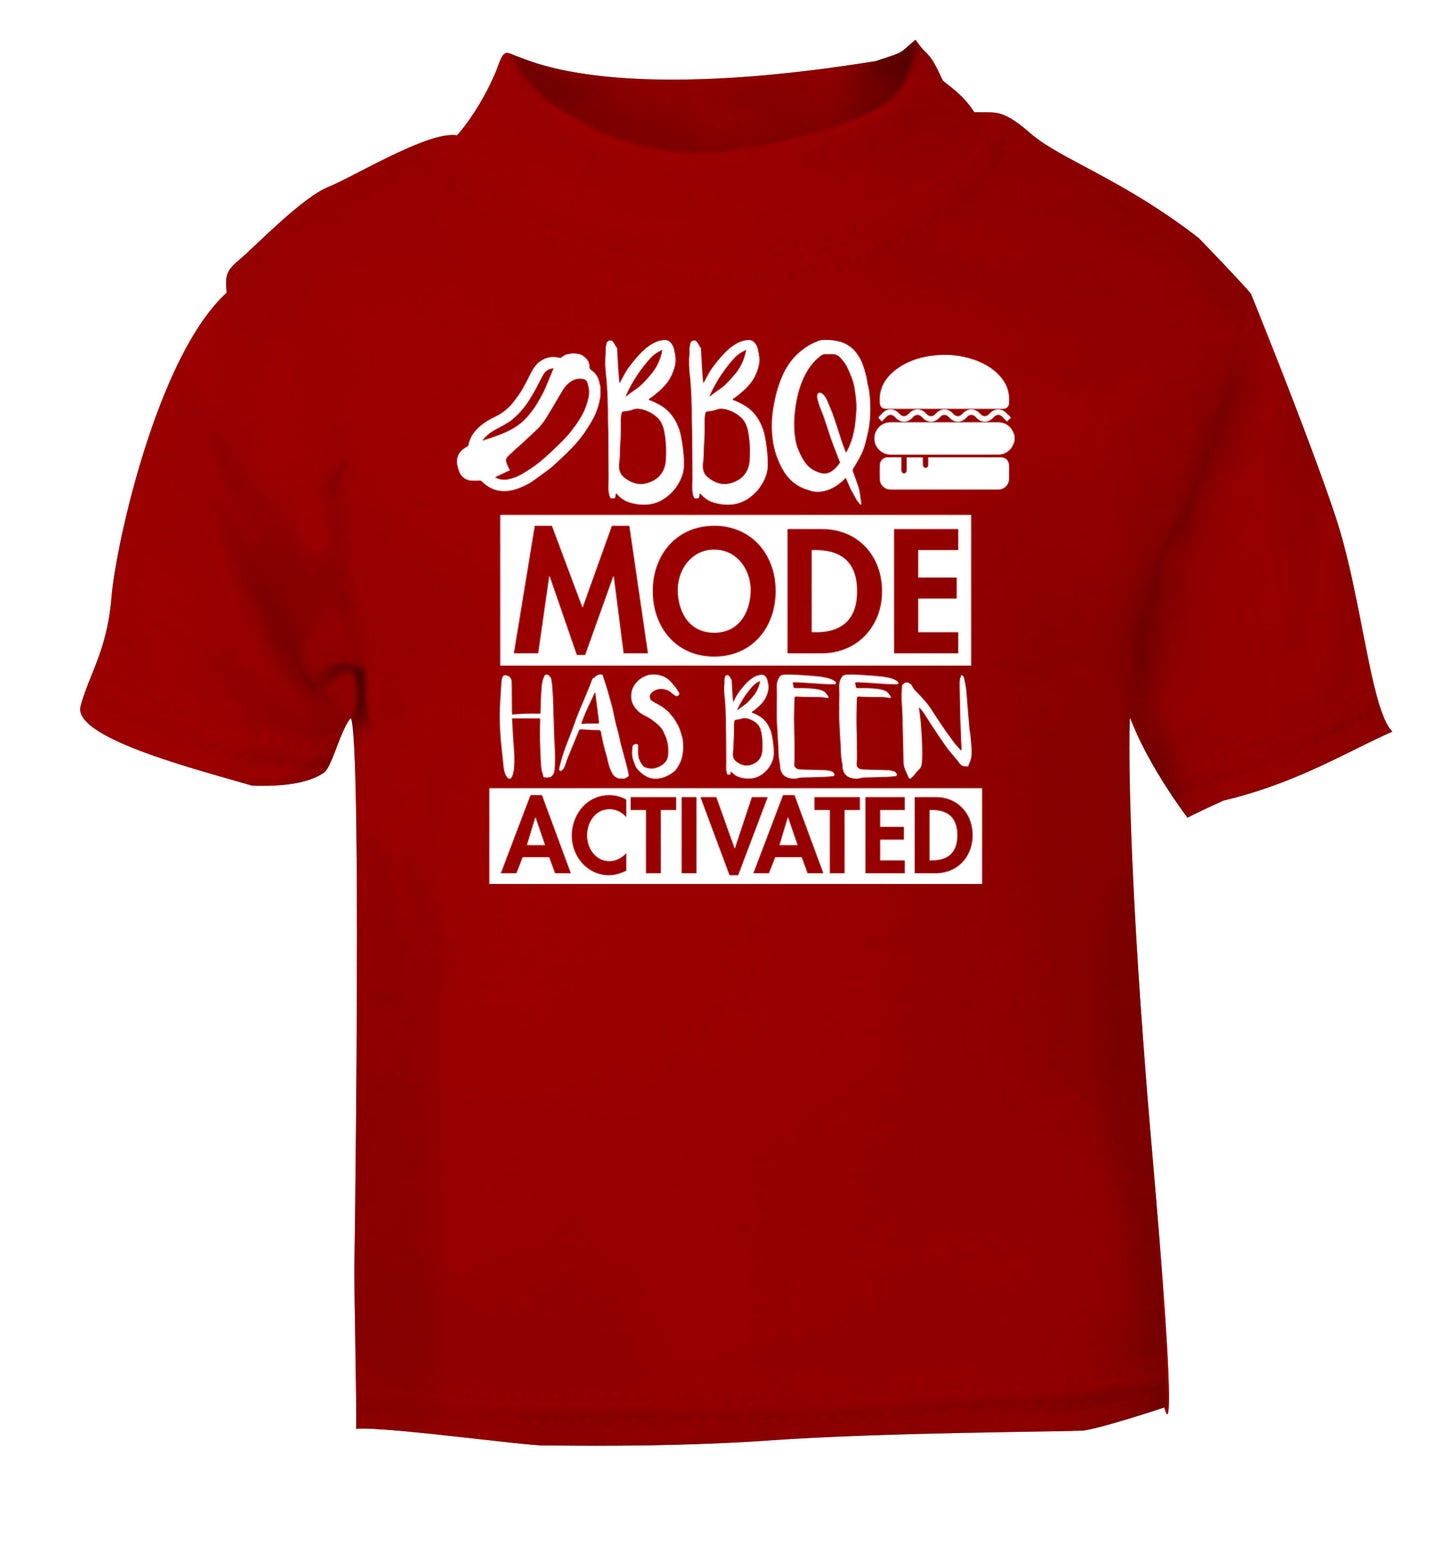 Bbq mode has been activated red Baby Toddler Tshirt 2 Years